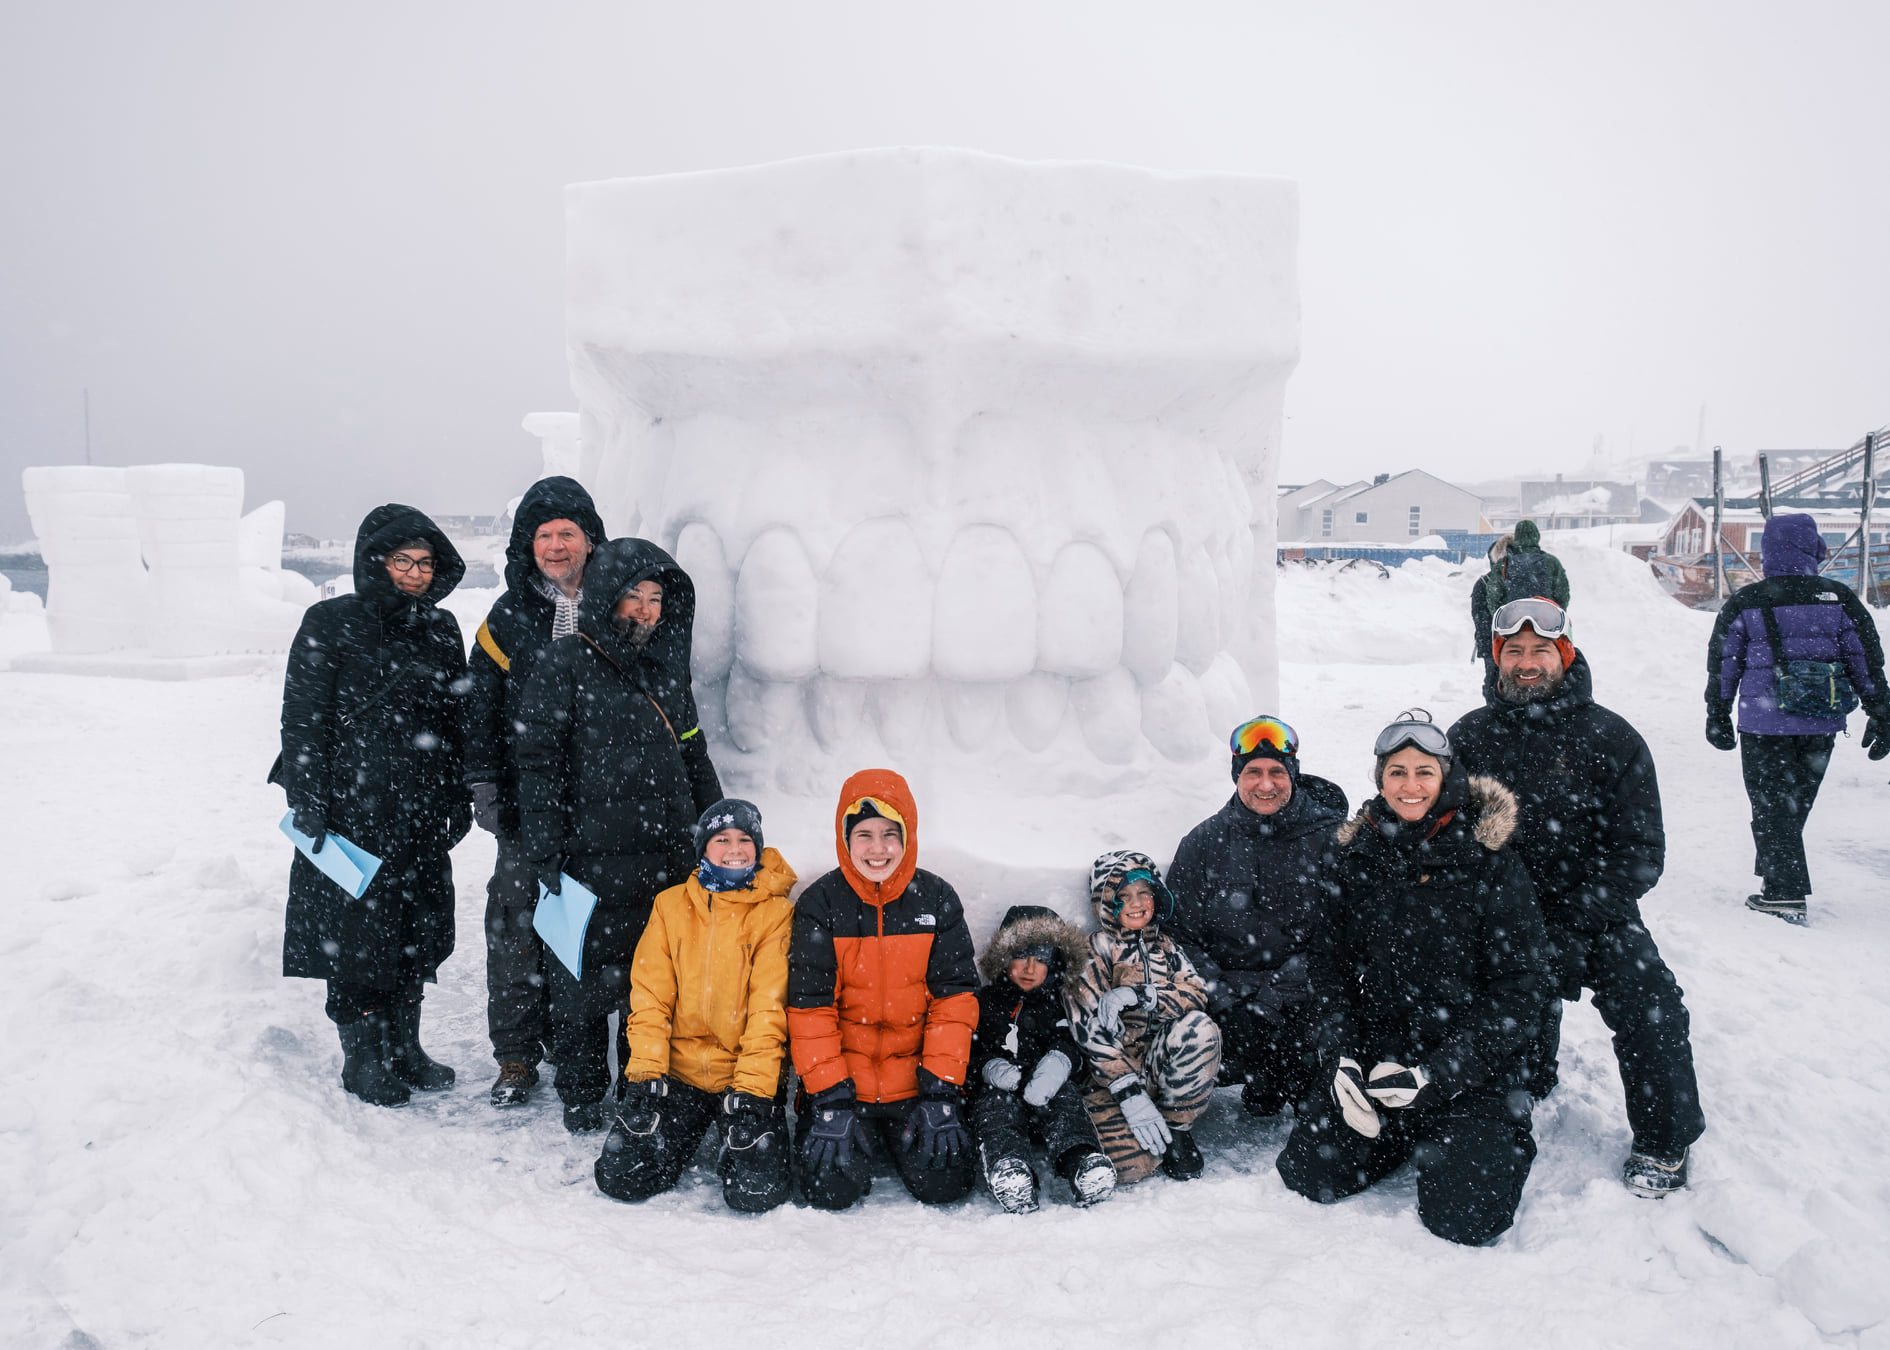 Adults_and_kids_in_front_of_snow_sculpture_made_of_teeth_in_snowy_weather_photo_cebastian_rosing_2022